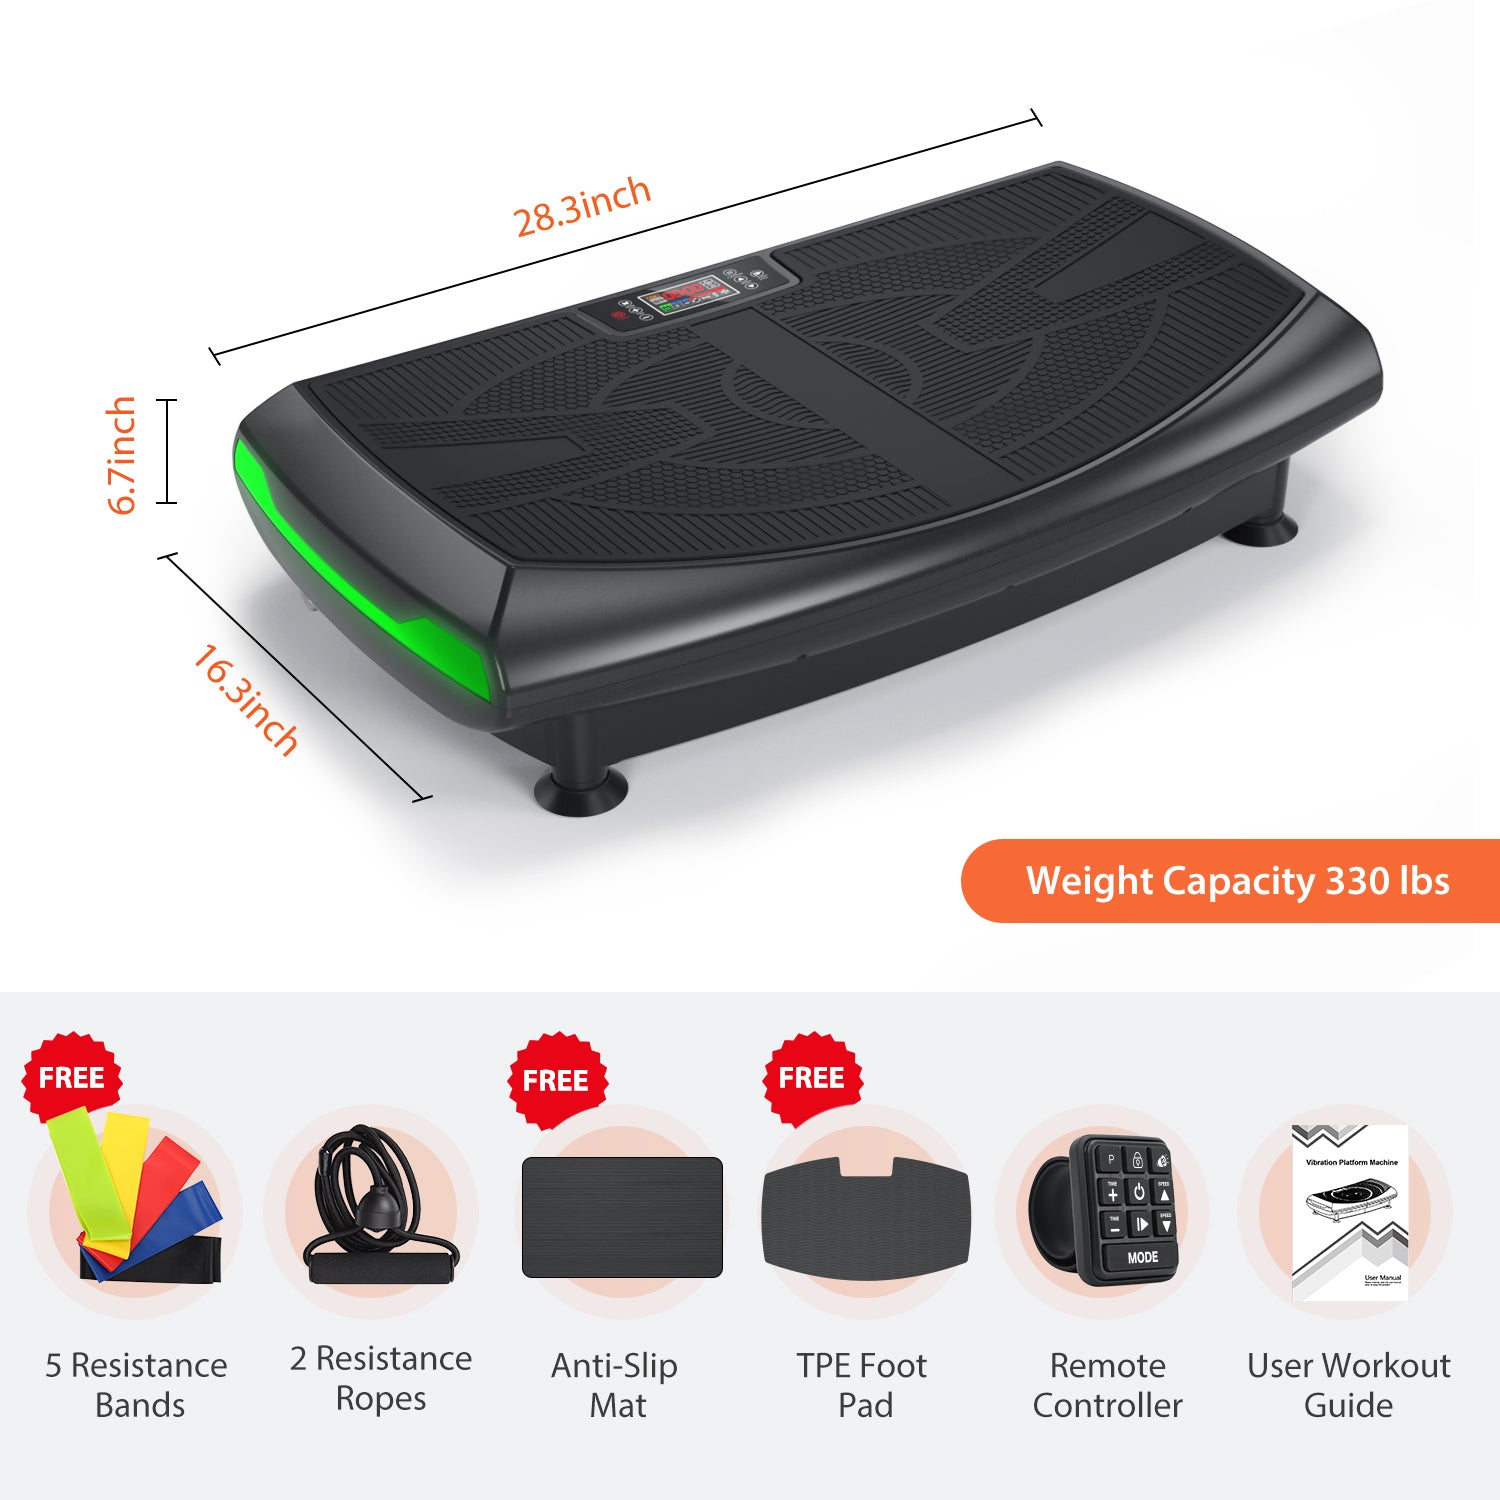 Bluetooth Speaker Vibrarating Plate for Weight Loss False Touch Prevention Screen Magnergy 4D Vibration Plate Exercise Machine 3 Motors Whole Body Vibration Platform with Wrist Remote Control